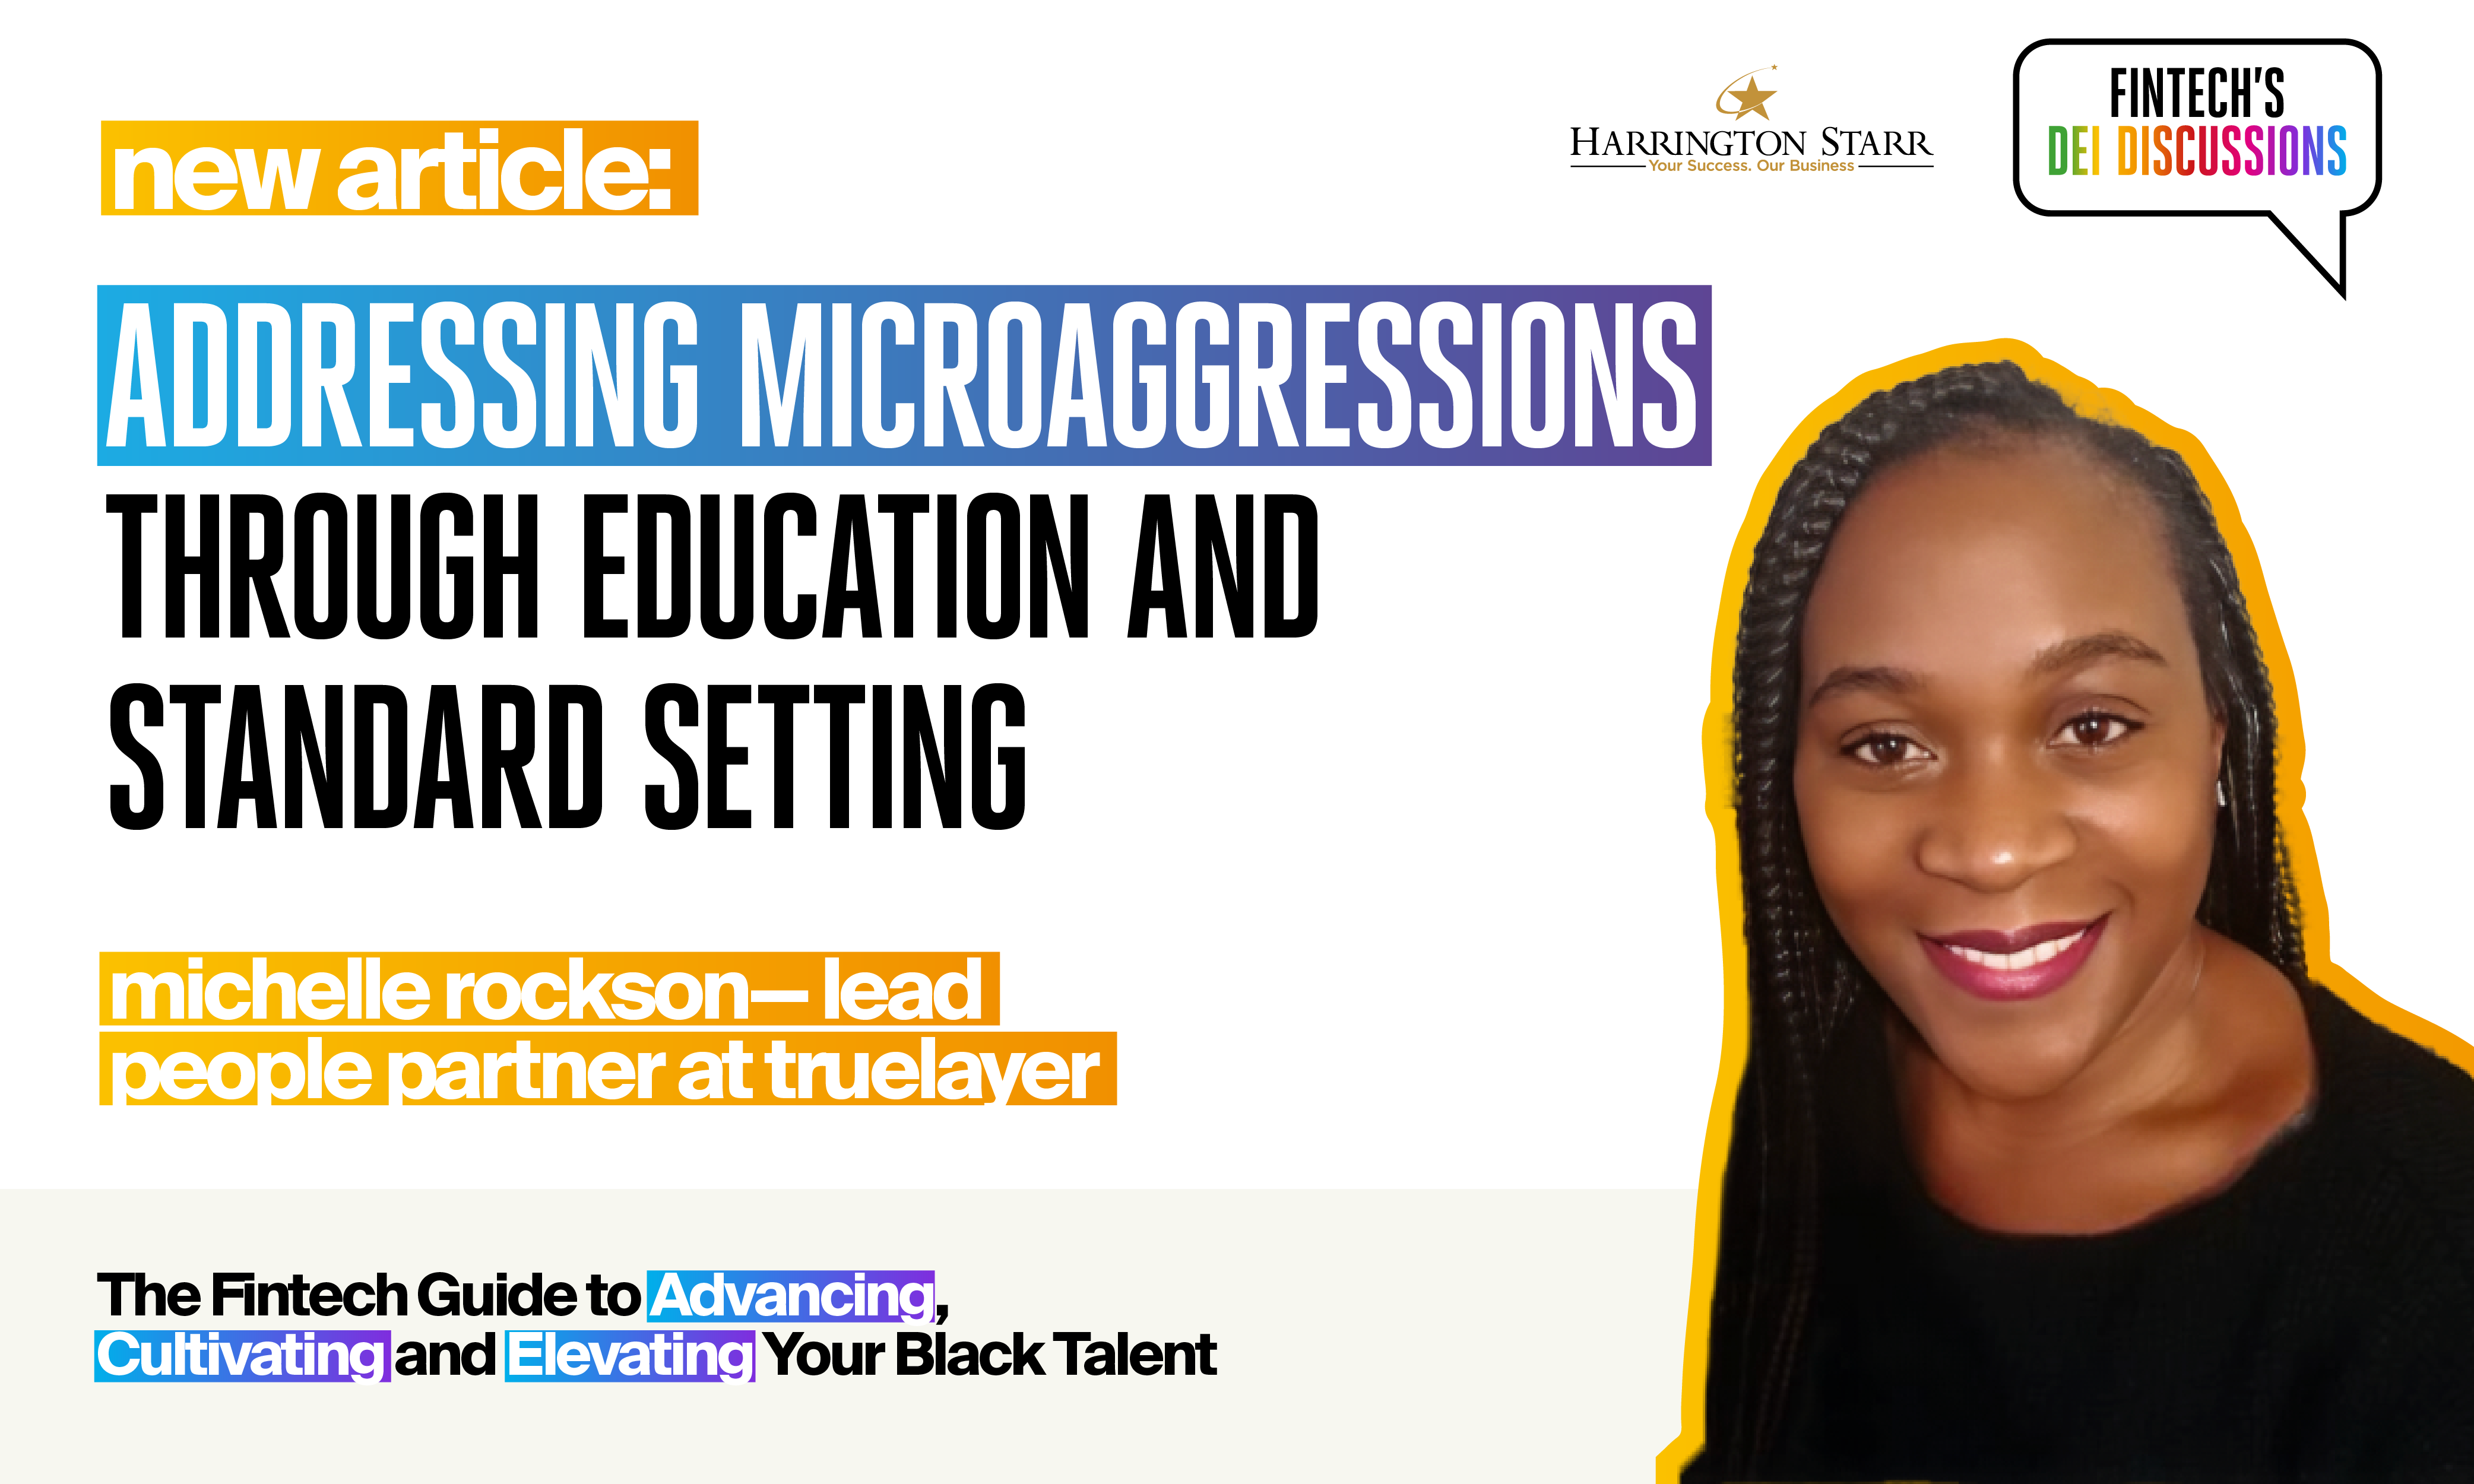 Addressing Microaggressions through Education and Standard Setting